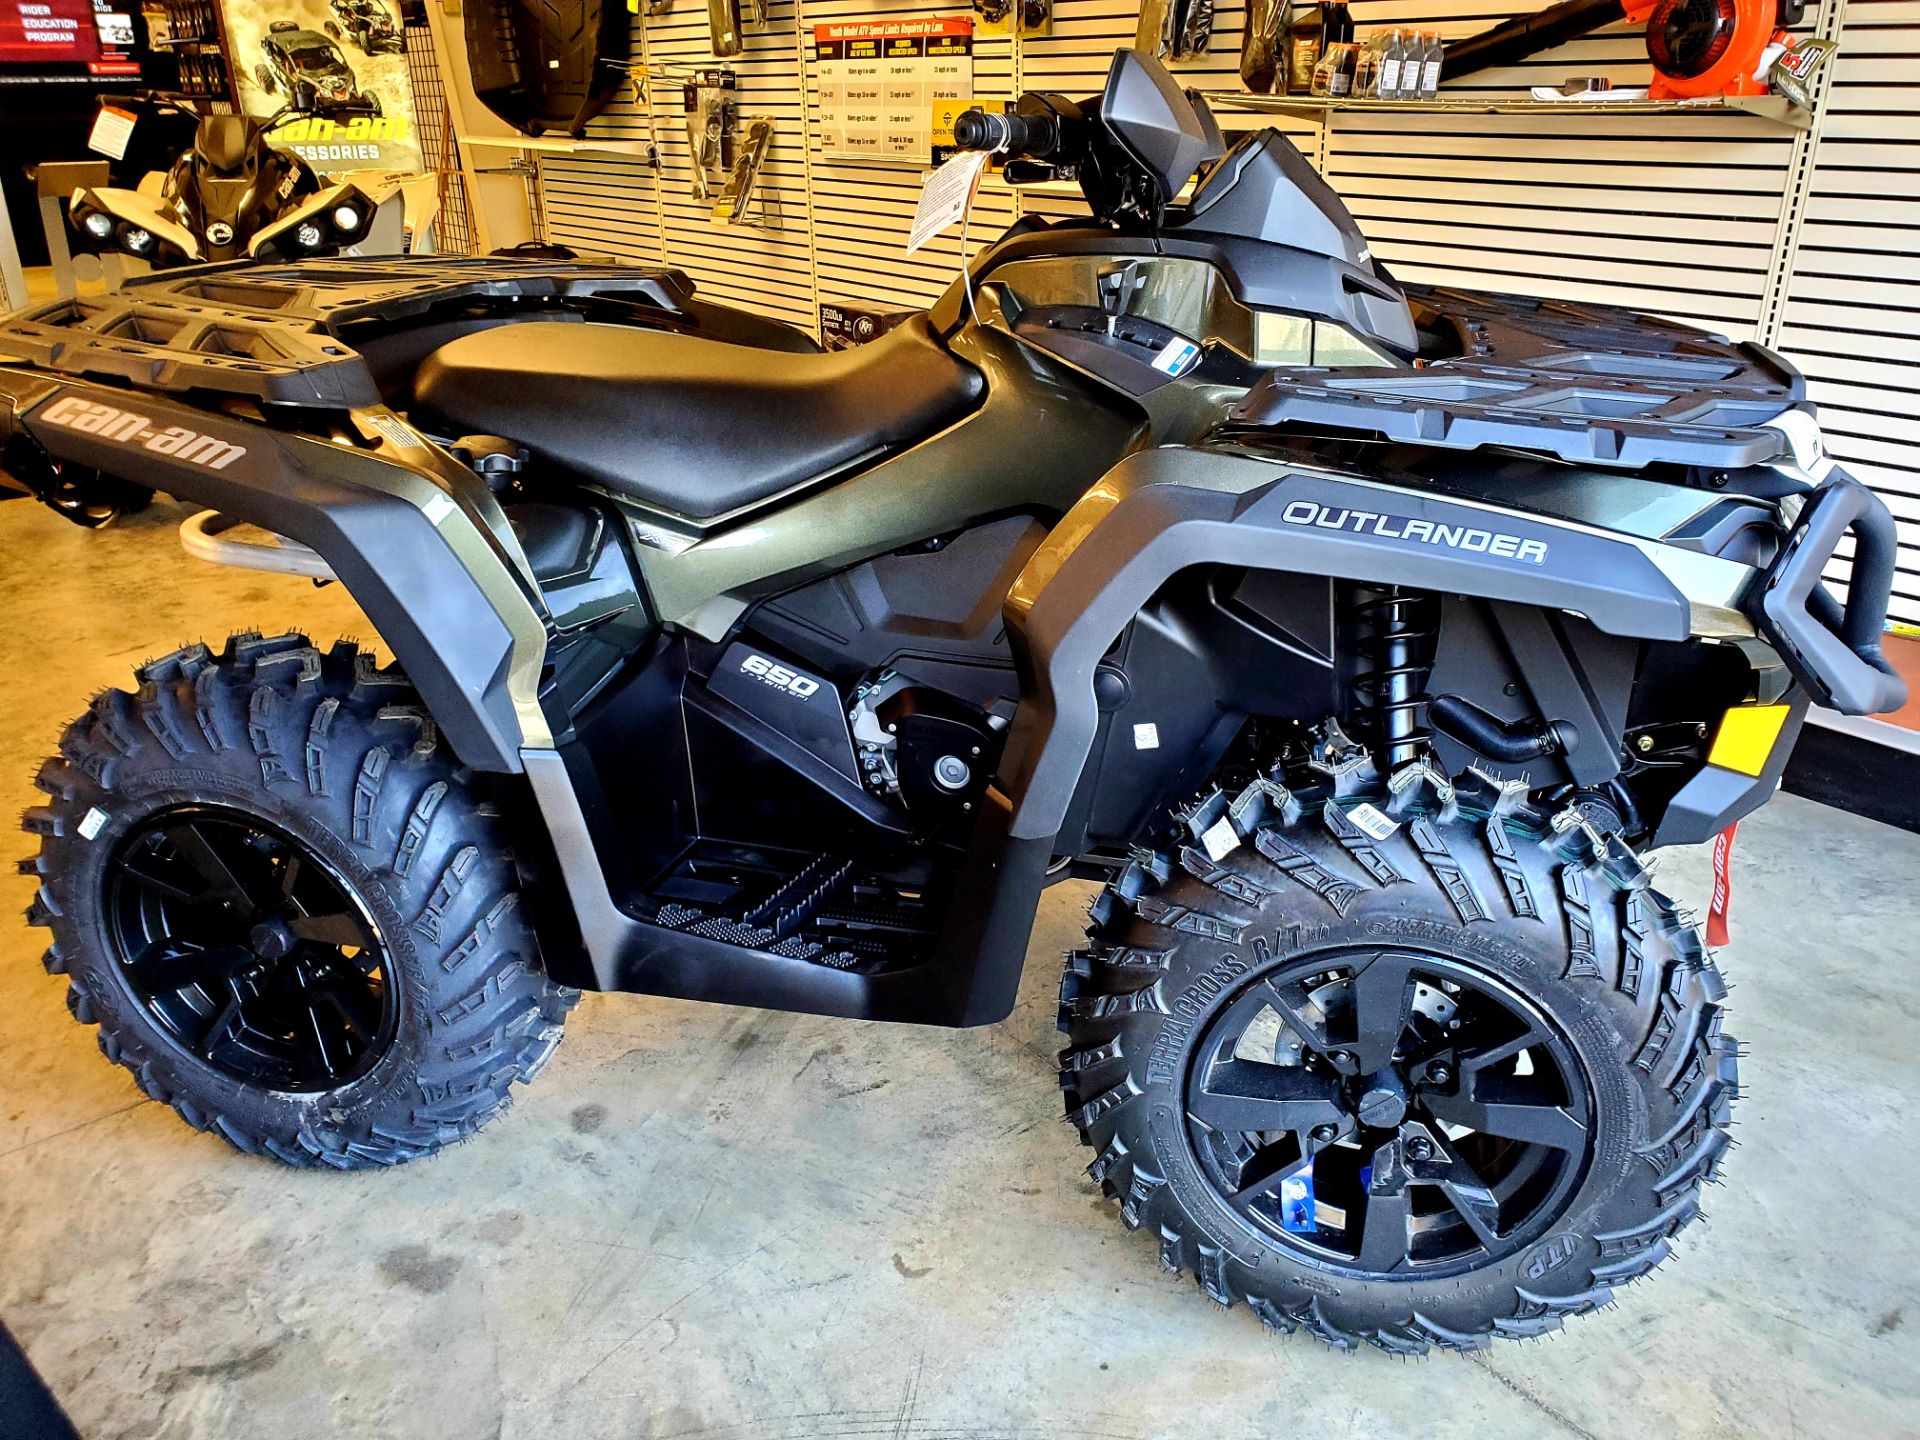 2022 Can-Am Outlander XT 650 in Pearl, Mississippi - Photo 1